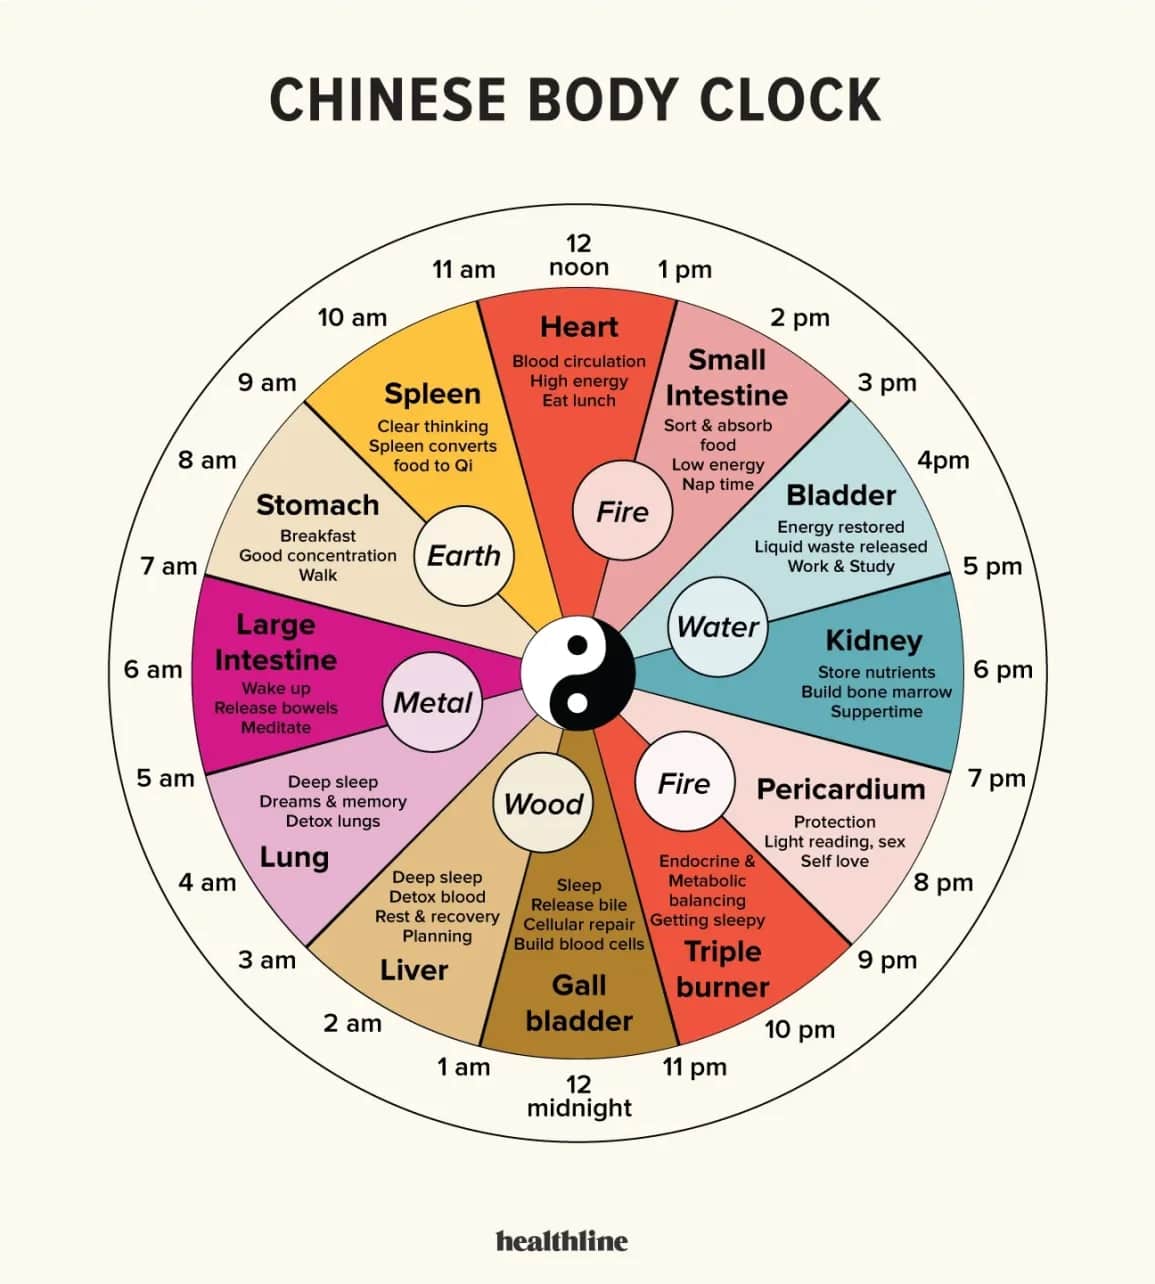 Chinese Body Clock by Healthline